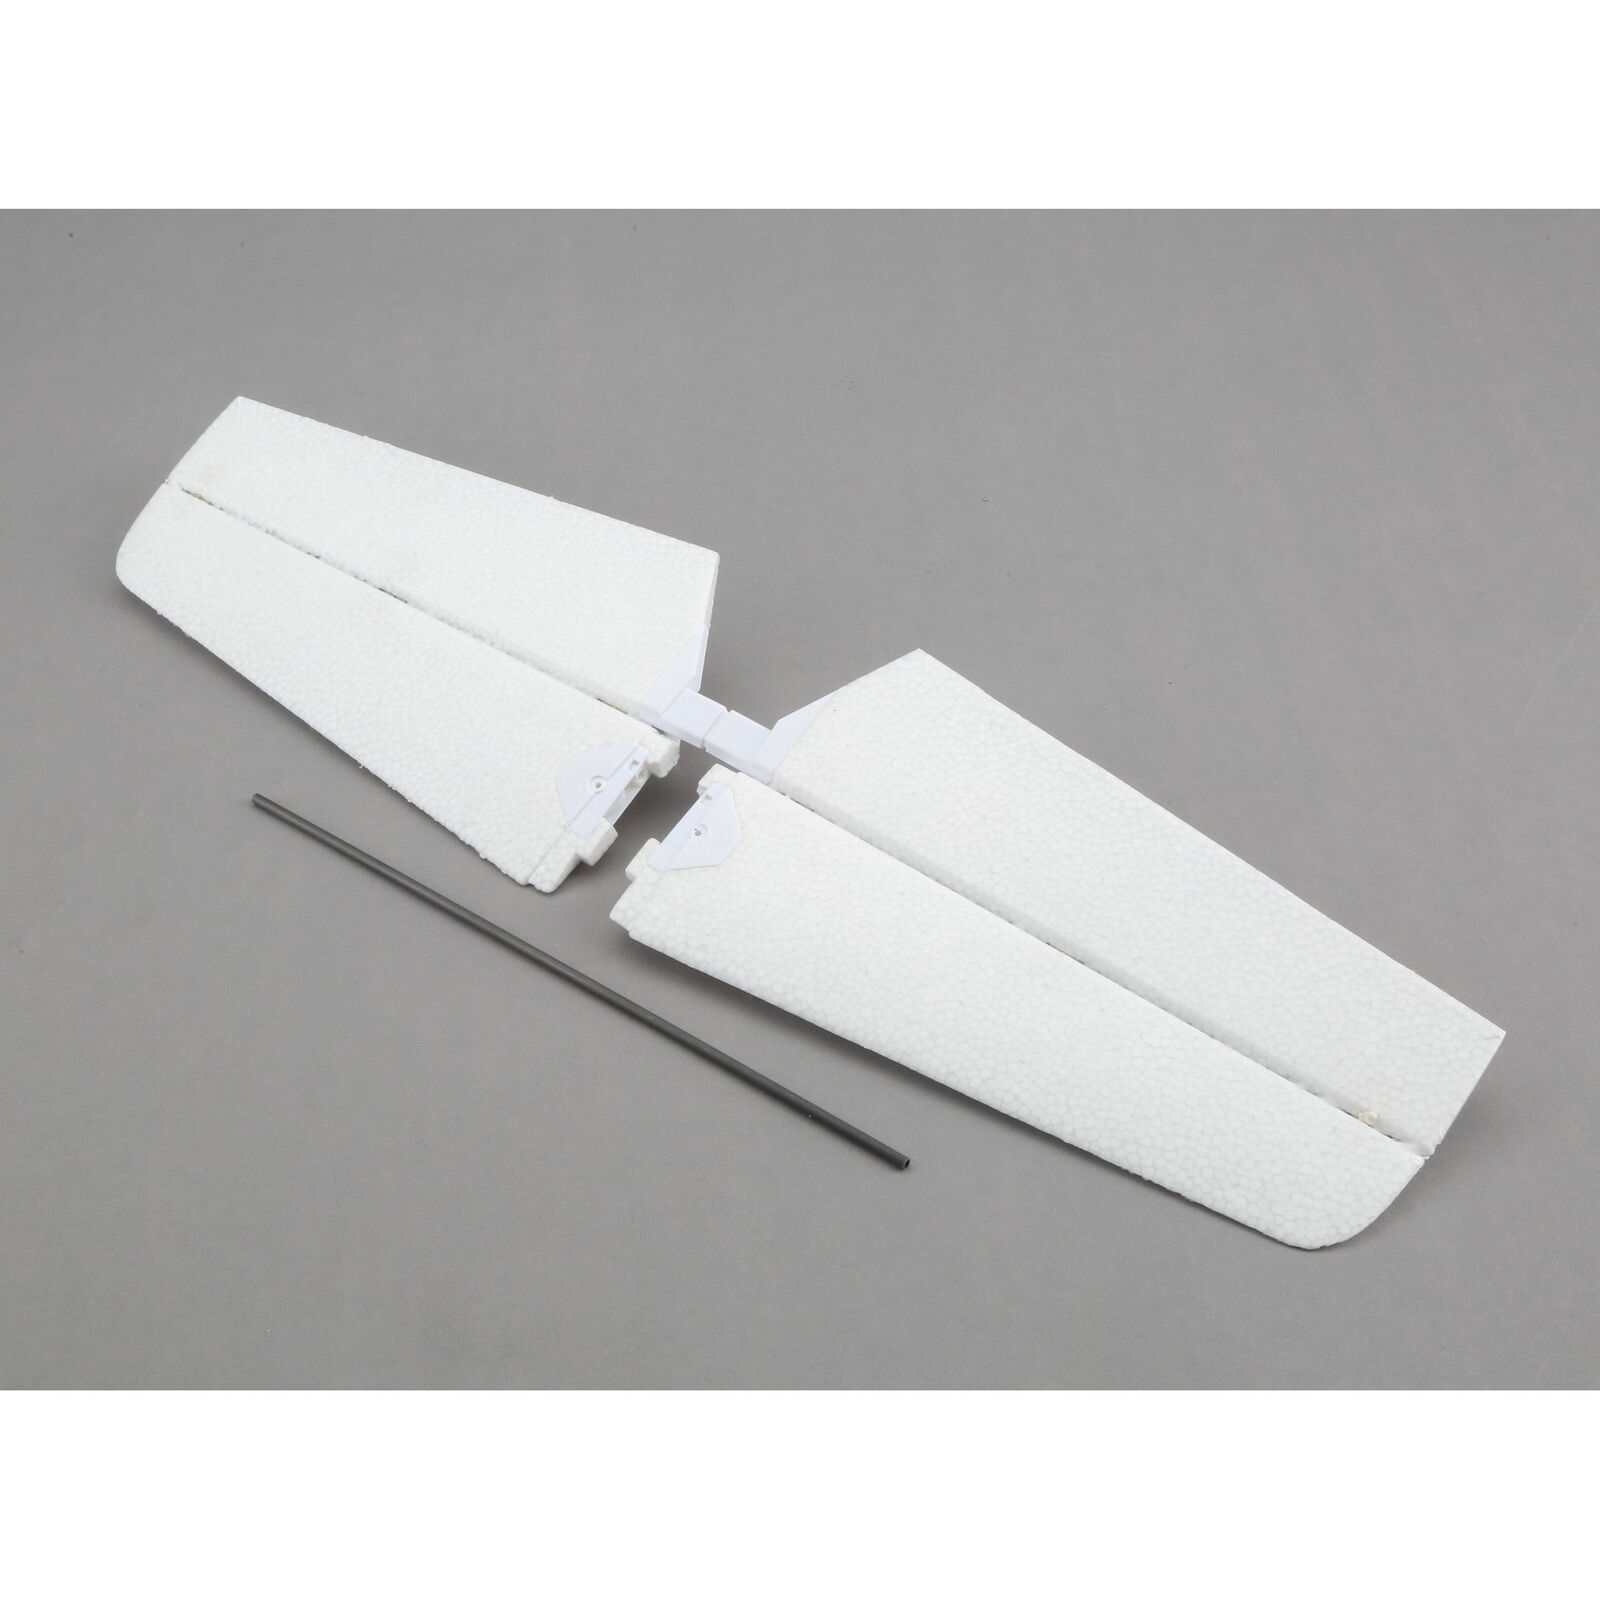 Horizontal Stabilizer with Tube: Timber